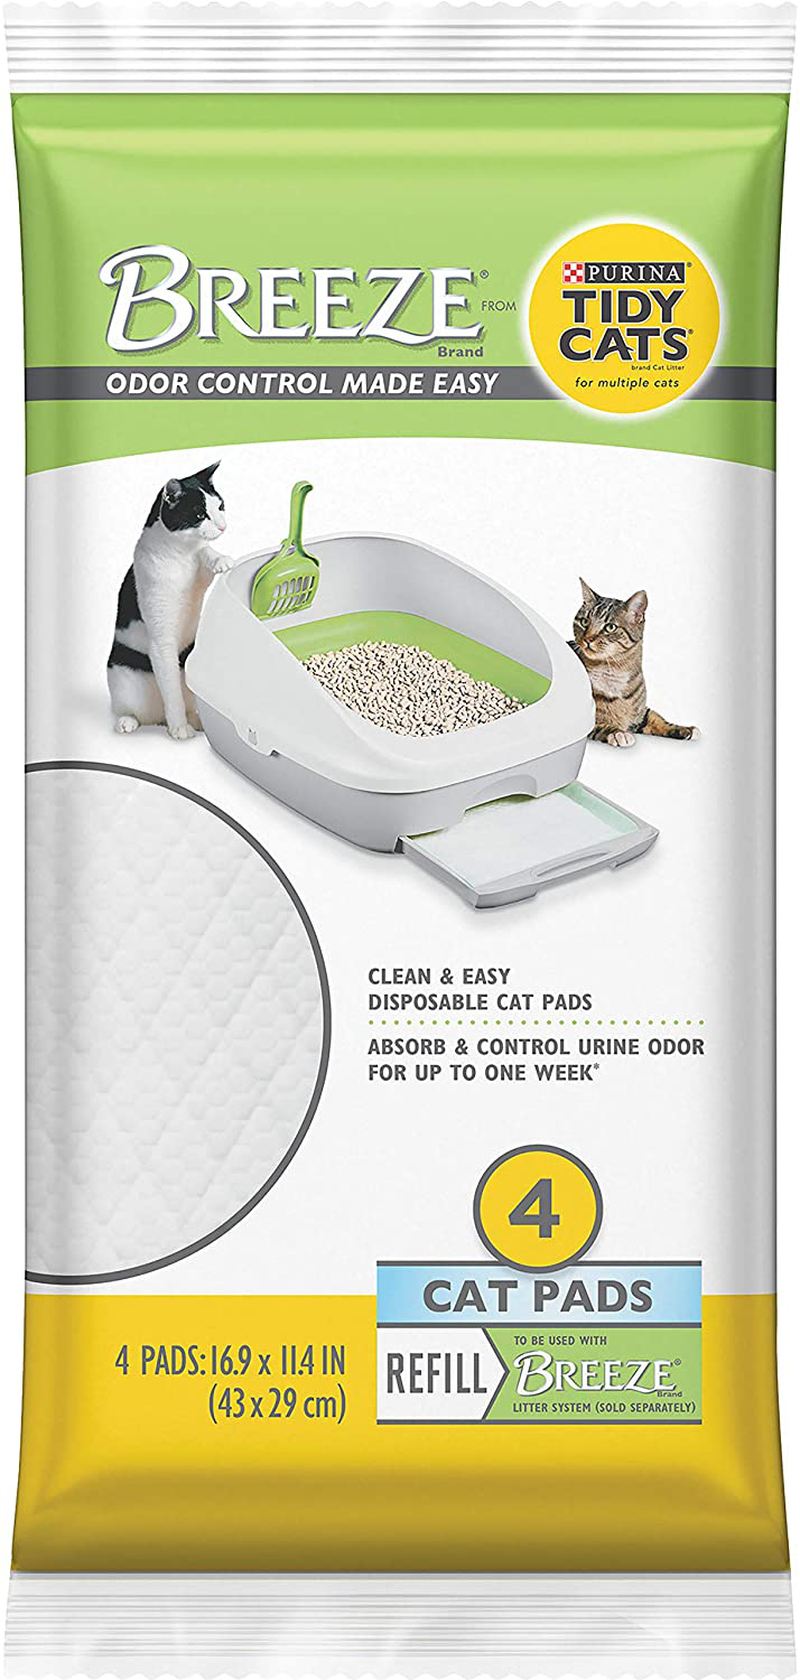 Purina Tidy Cats Breeze Cat Pads Refill, Clean & Easy Disposable Cat Pads for Breeze Litter System, Odor Control Cat Pads for Multiple Cats, 4 Cat Pads/Pack (Pack of 2) Animals & Pet Supplies > Pet Supplies > Cat Supplies > Cat Litter Tidy Cat   